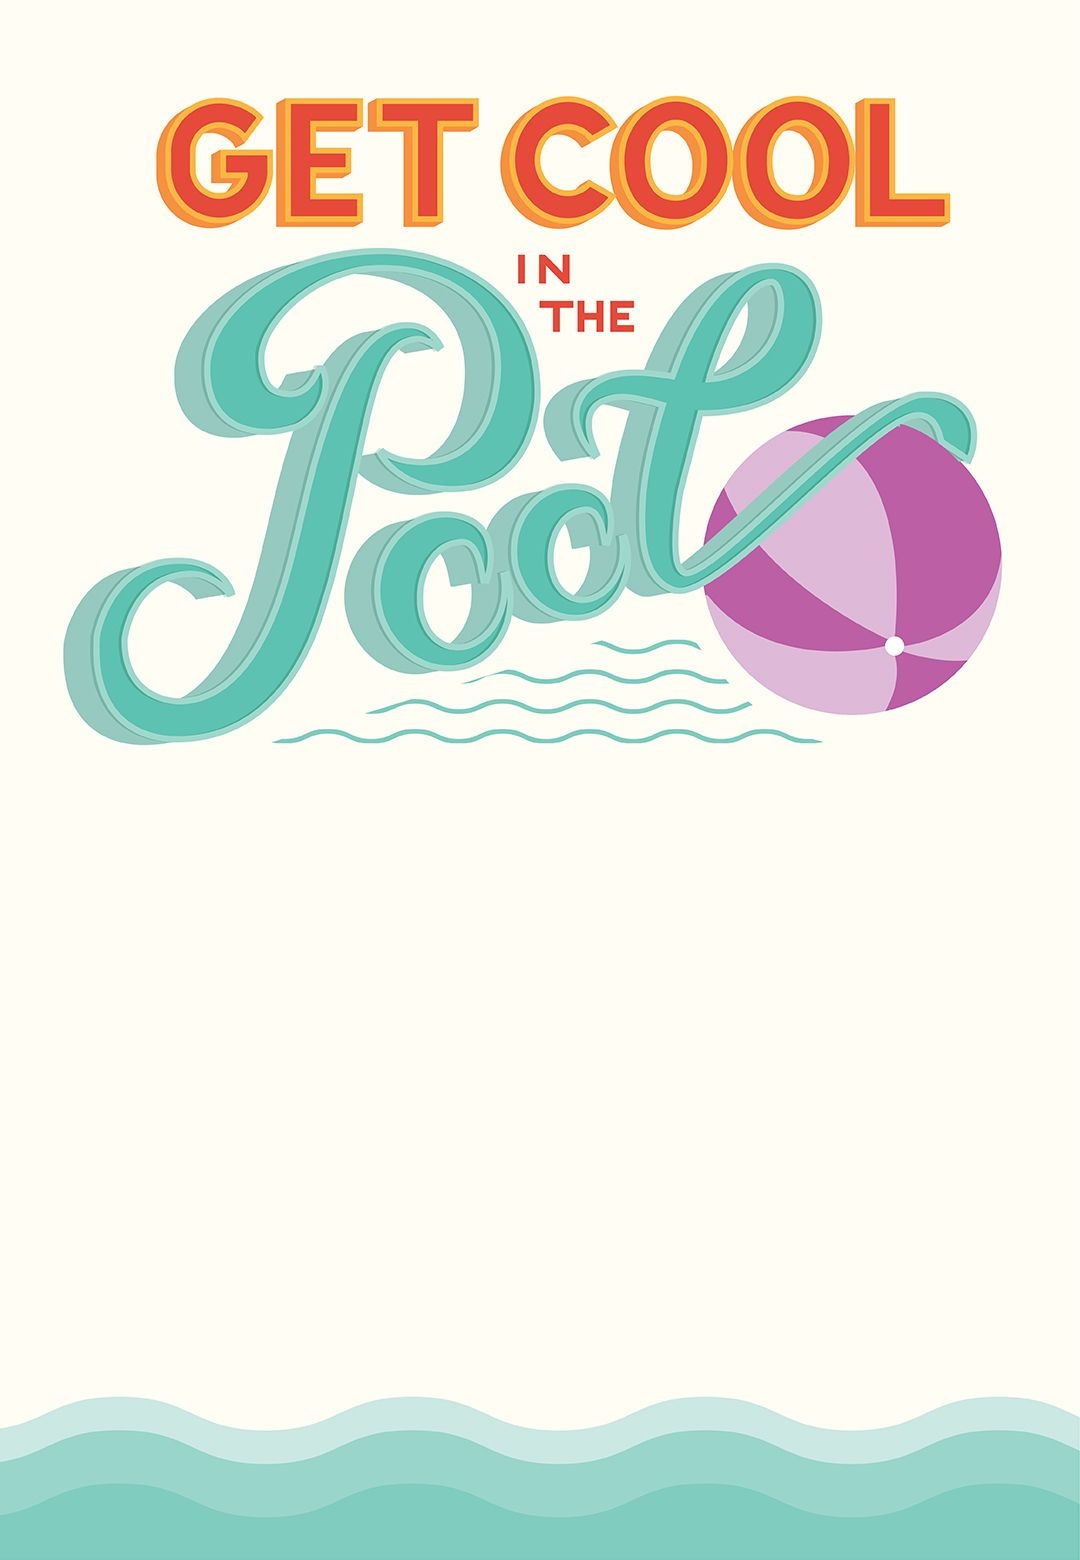 Pool Party - Free Printable Party Invitation Template | Greetings - Pool Party Flyers Free Printable